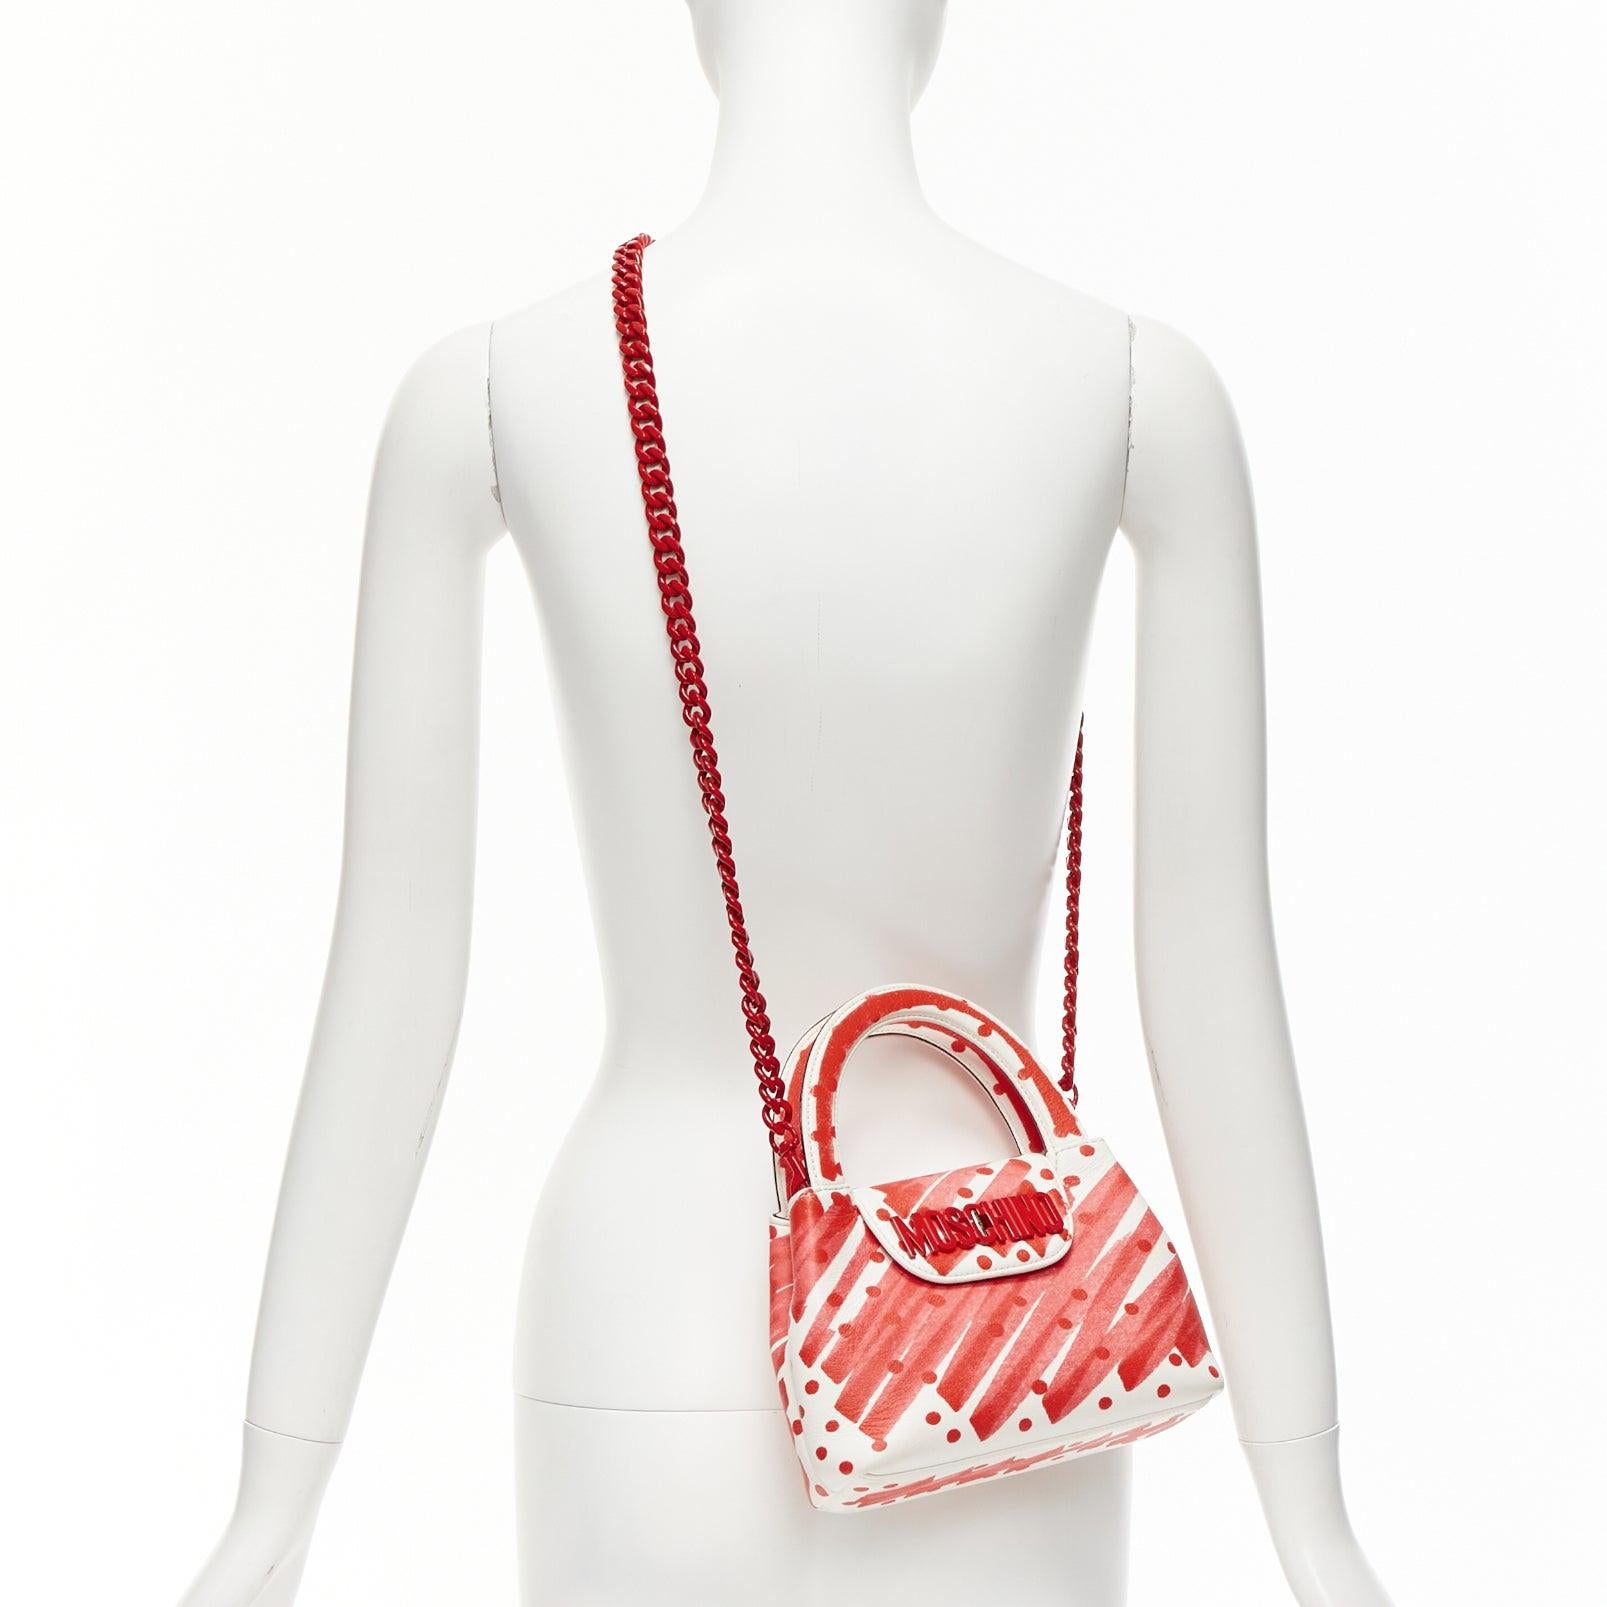 MOSCHINO Jeremy Scott 2019 Runway red white scribble marker crossbody bag
Reference: TGAS/D01095
Brand: Moschino
Designer: Jeremy Scott
Collection: SS 2019 - Runway
Material: Leather, Metal
Color: Red, White
Pattern: Abstract
Closure: